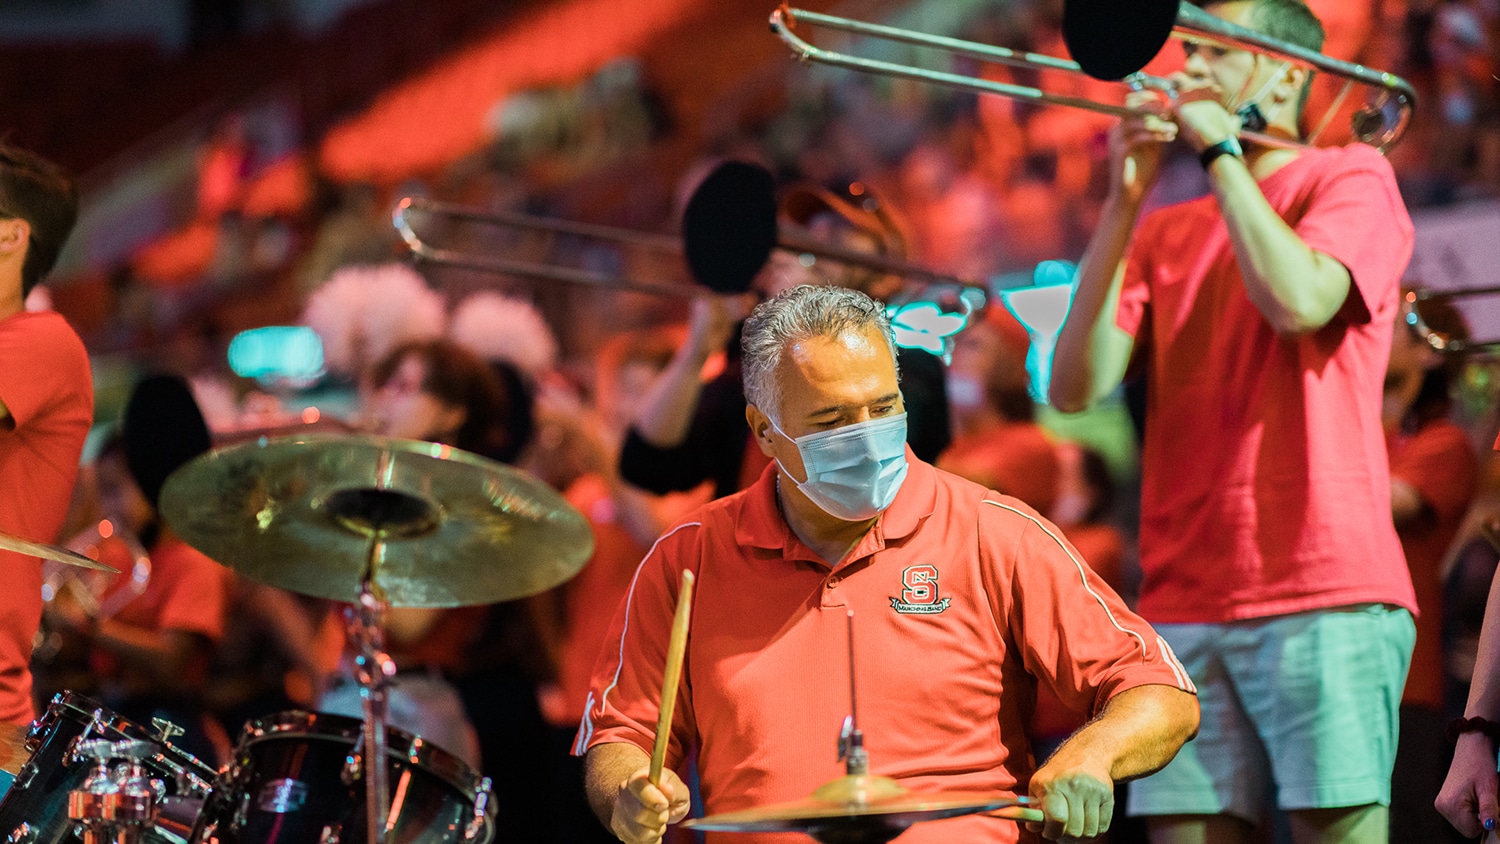 A man in a red shirt with the NC State logo plays the drums. Another man in a red shirt plays the trombone. 